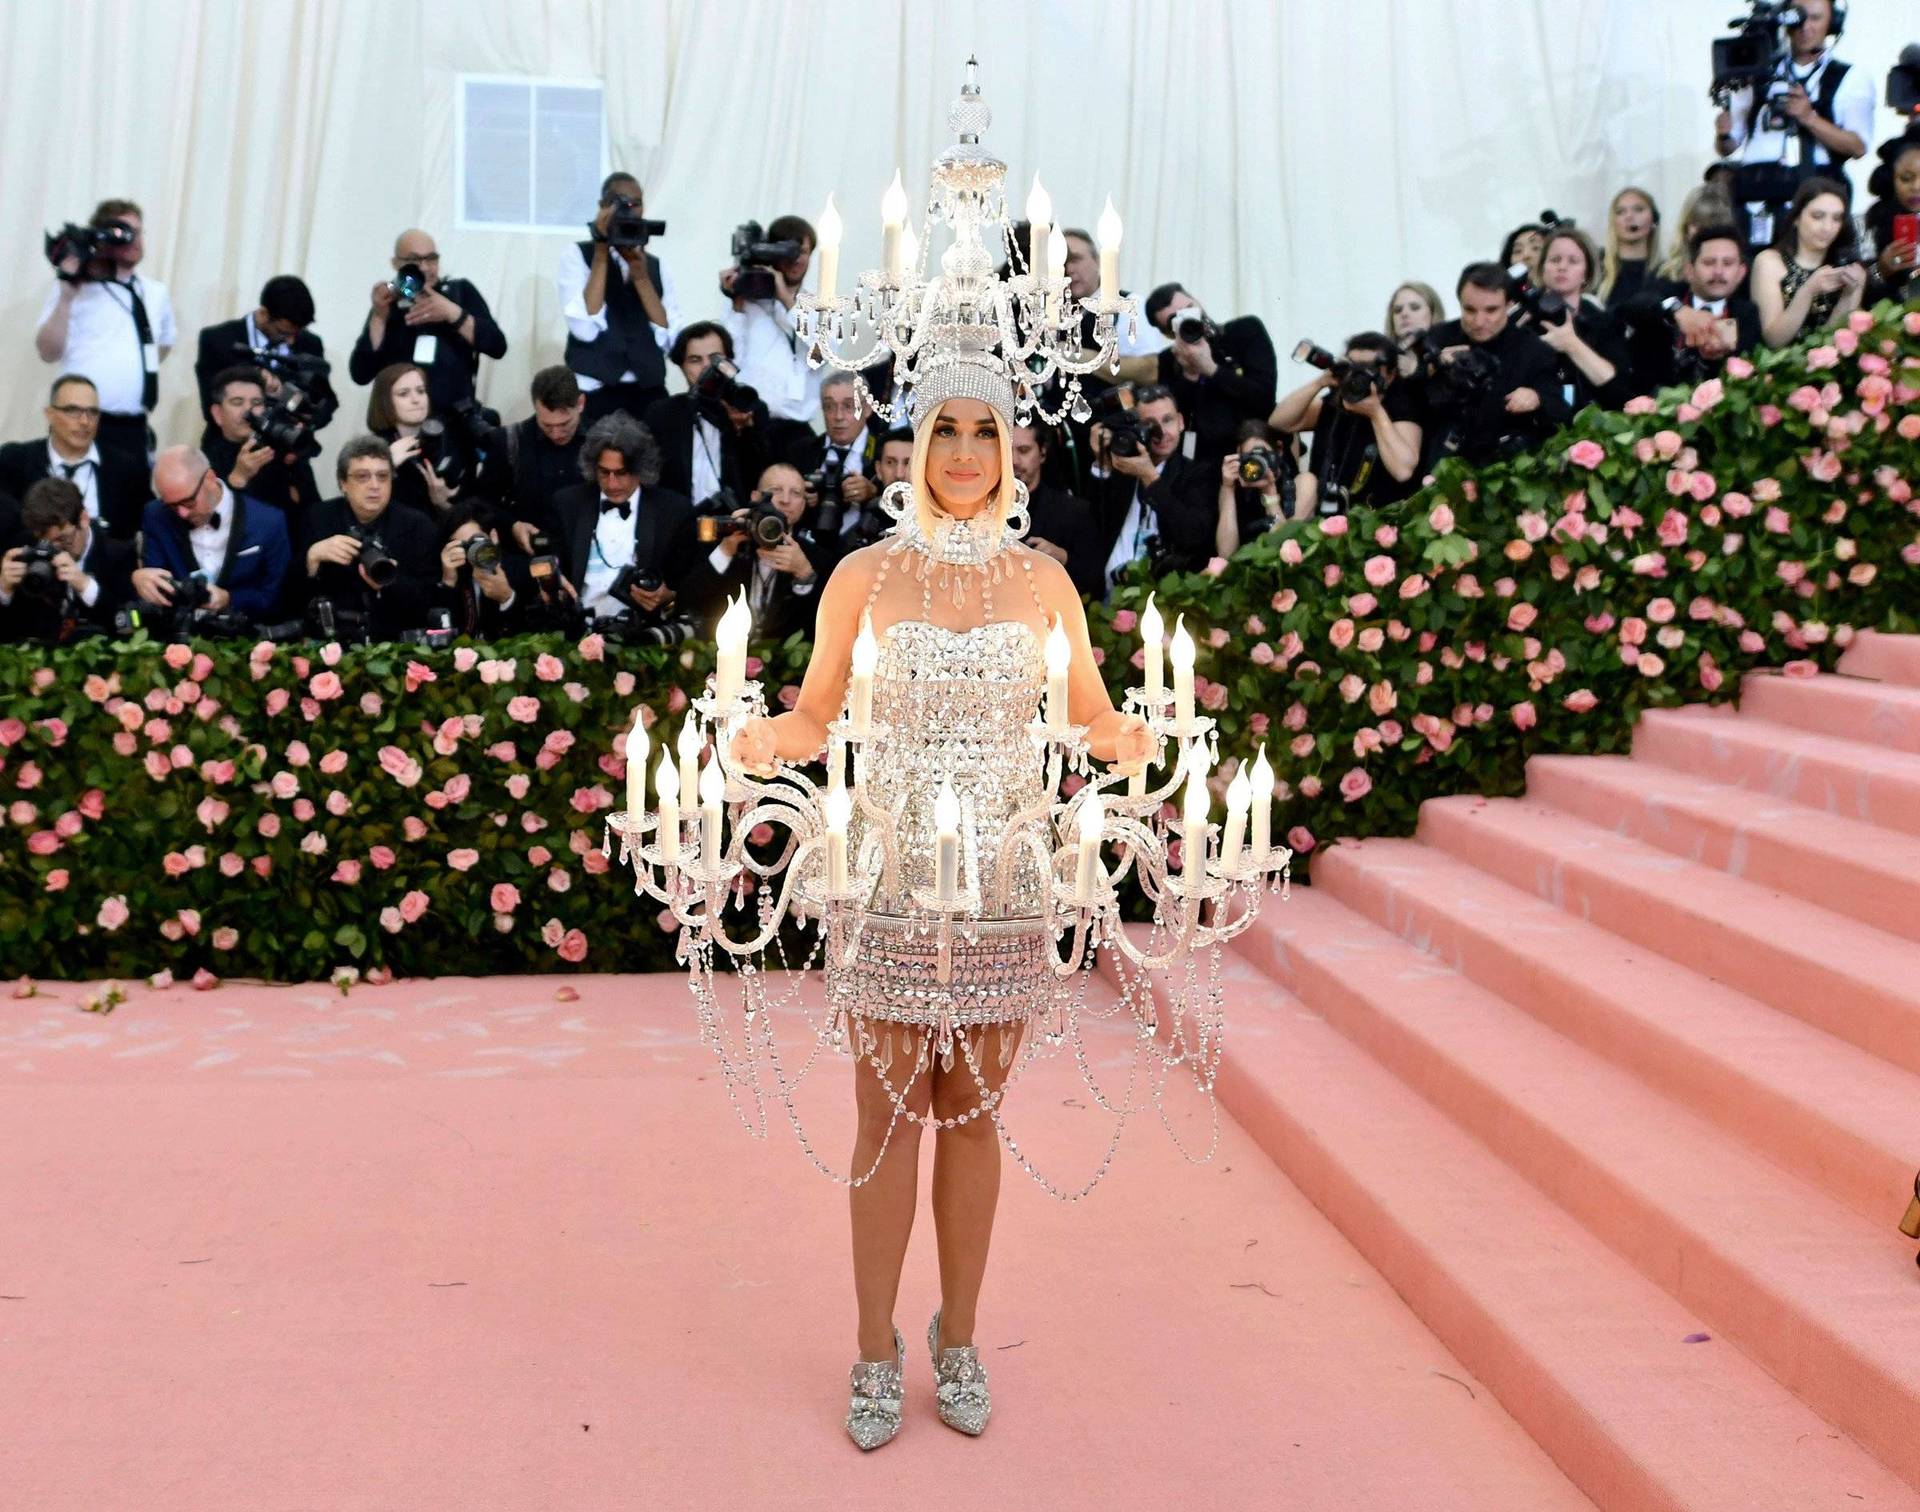 Of Wheres And Wears - katy-perry-met-gala-2019-camp